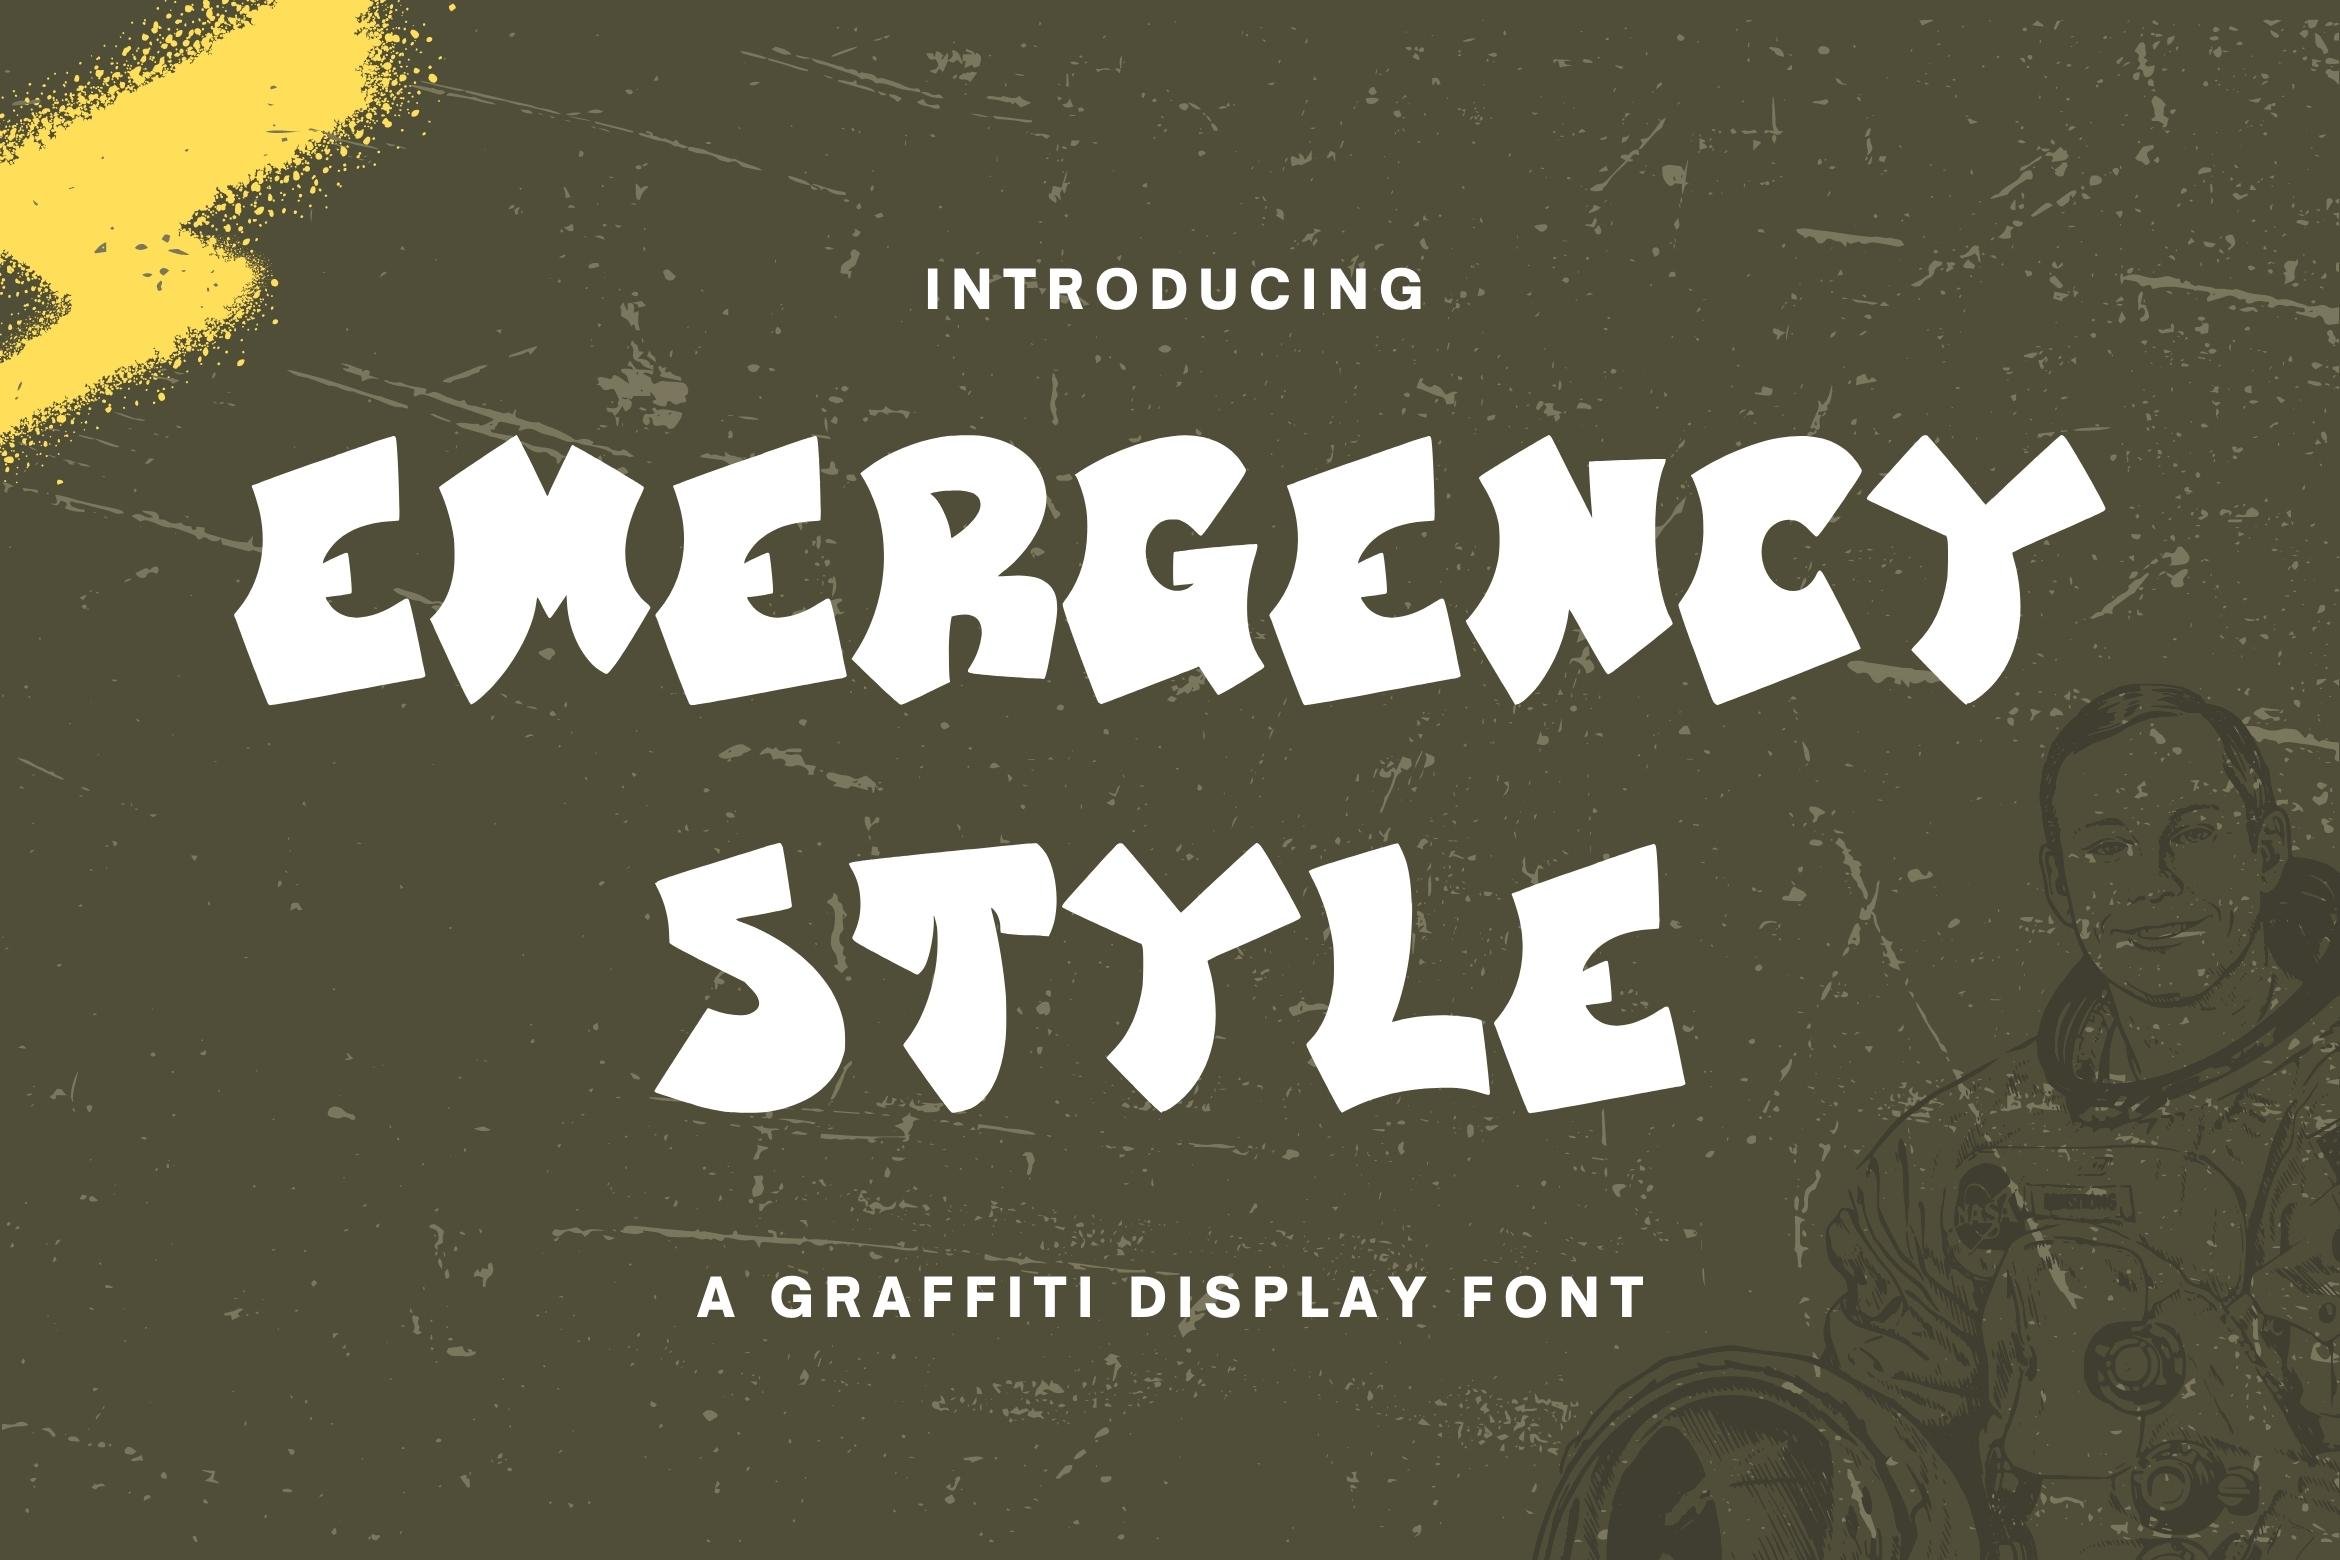 EmergencyStyle-Graffiti Display Font cover image.